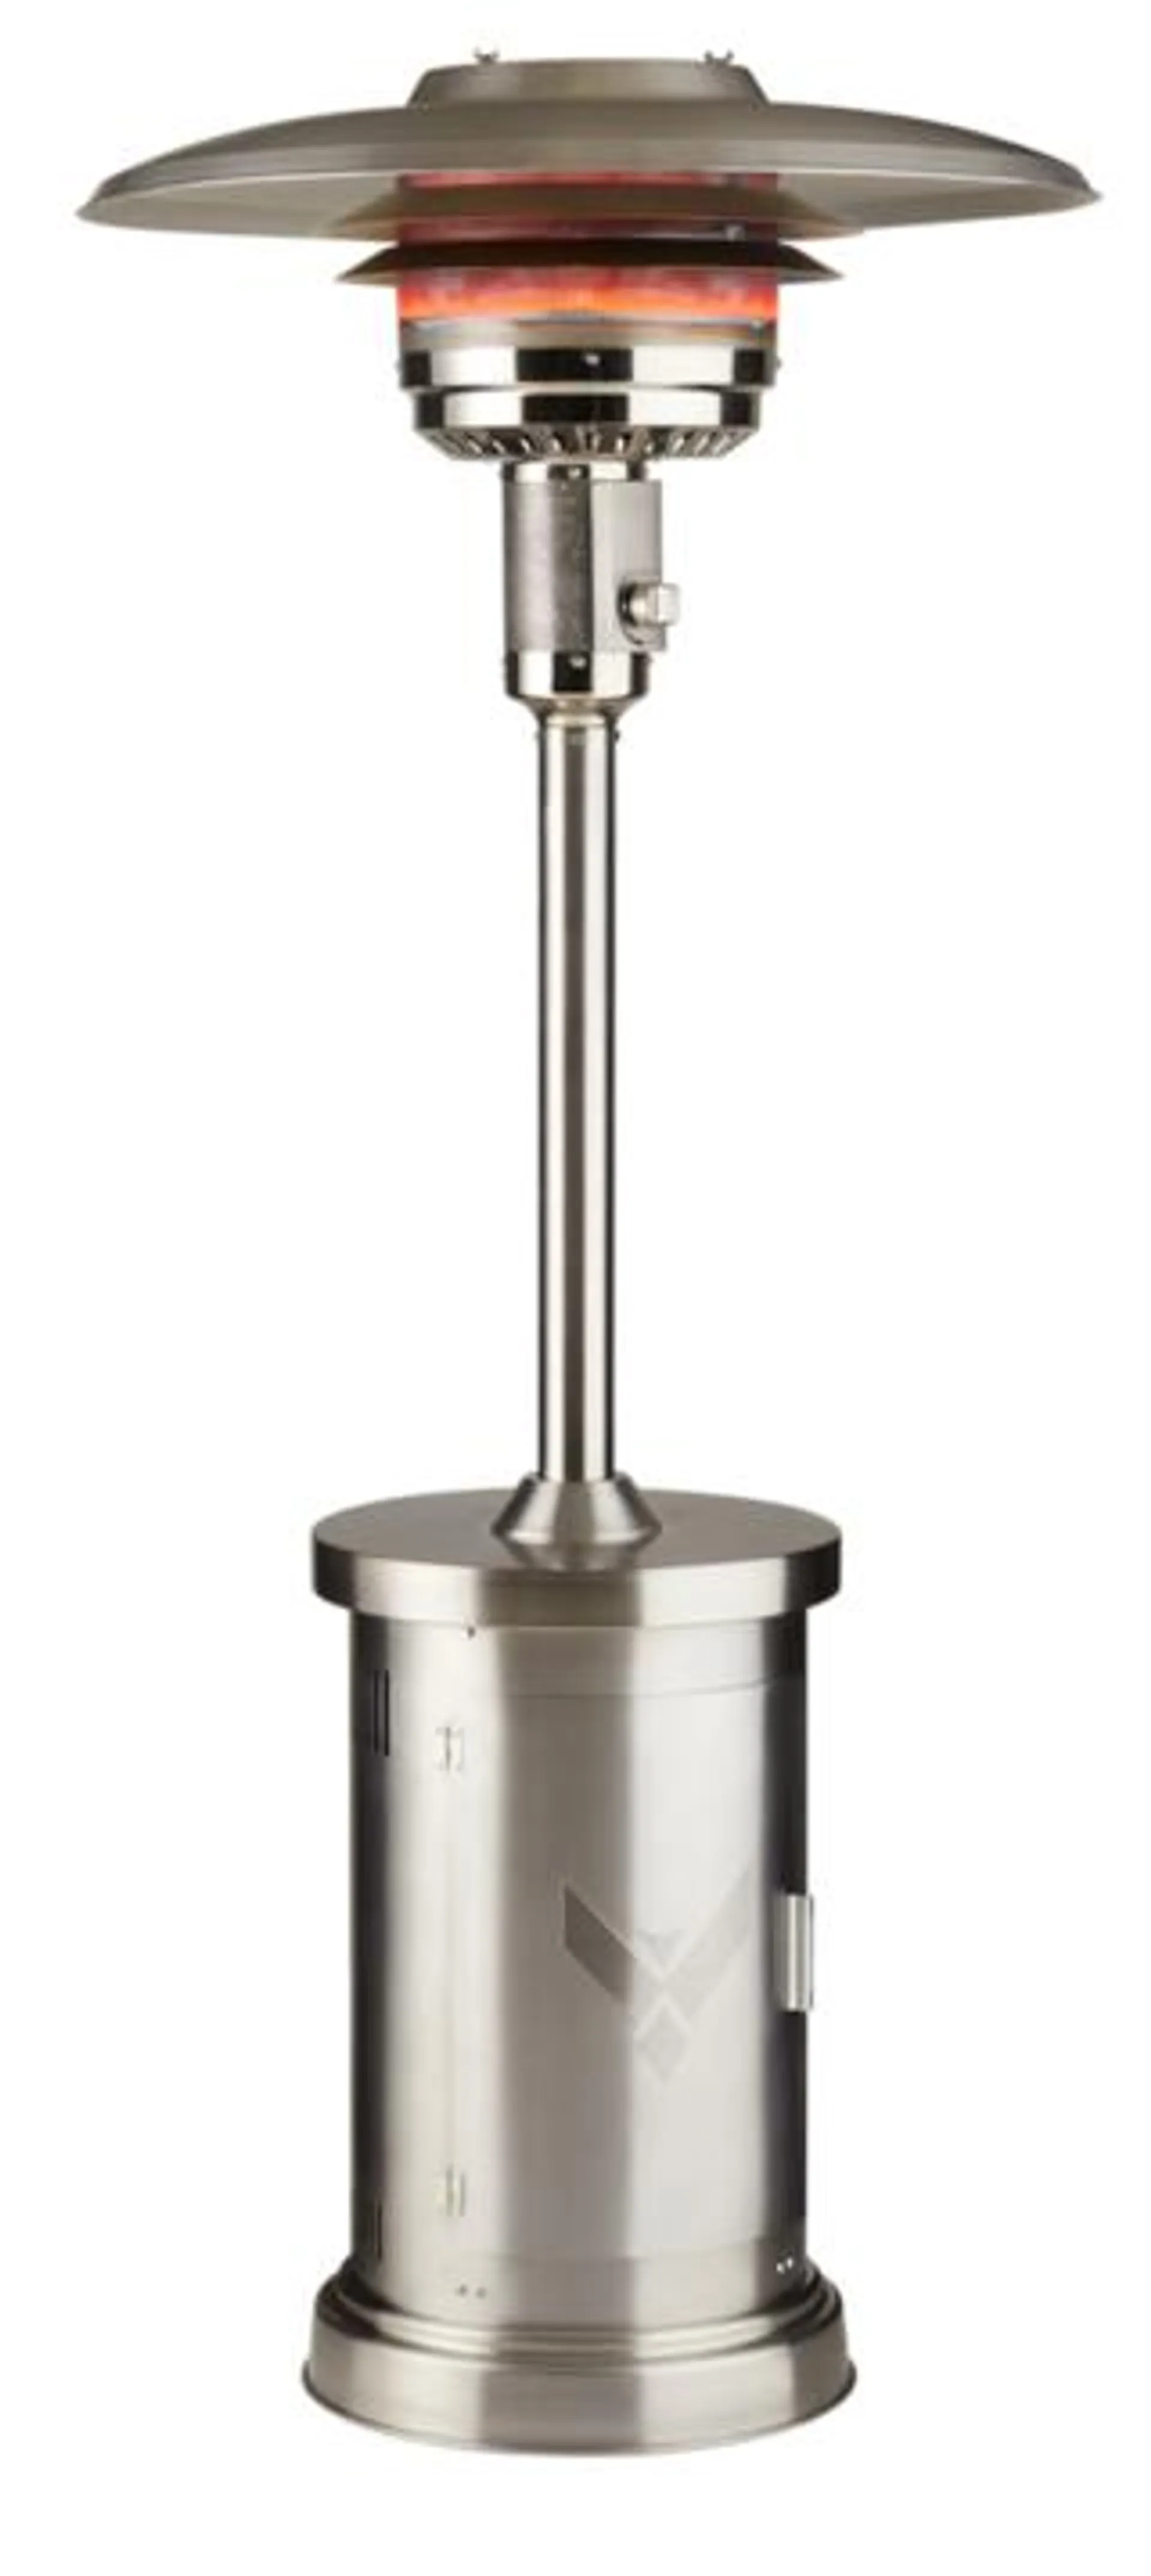 Vermont Castings Stainless Steel Propane Patio Heater